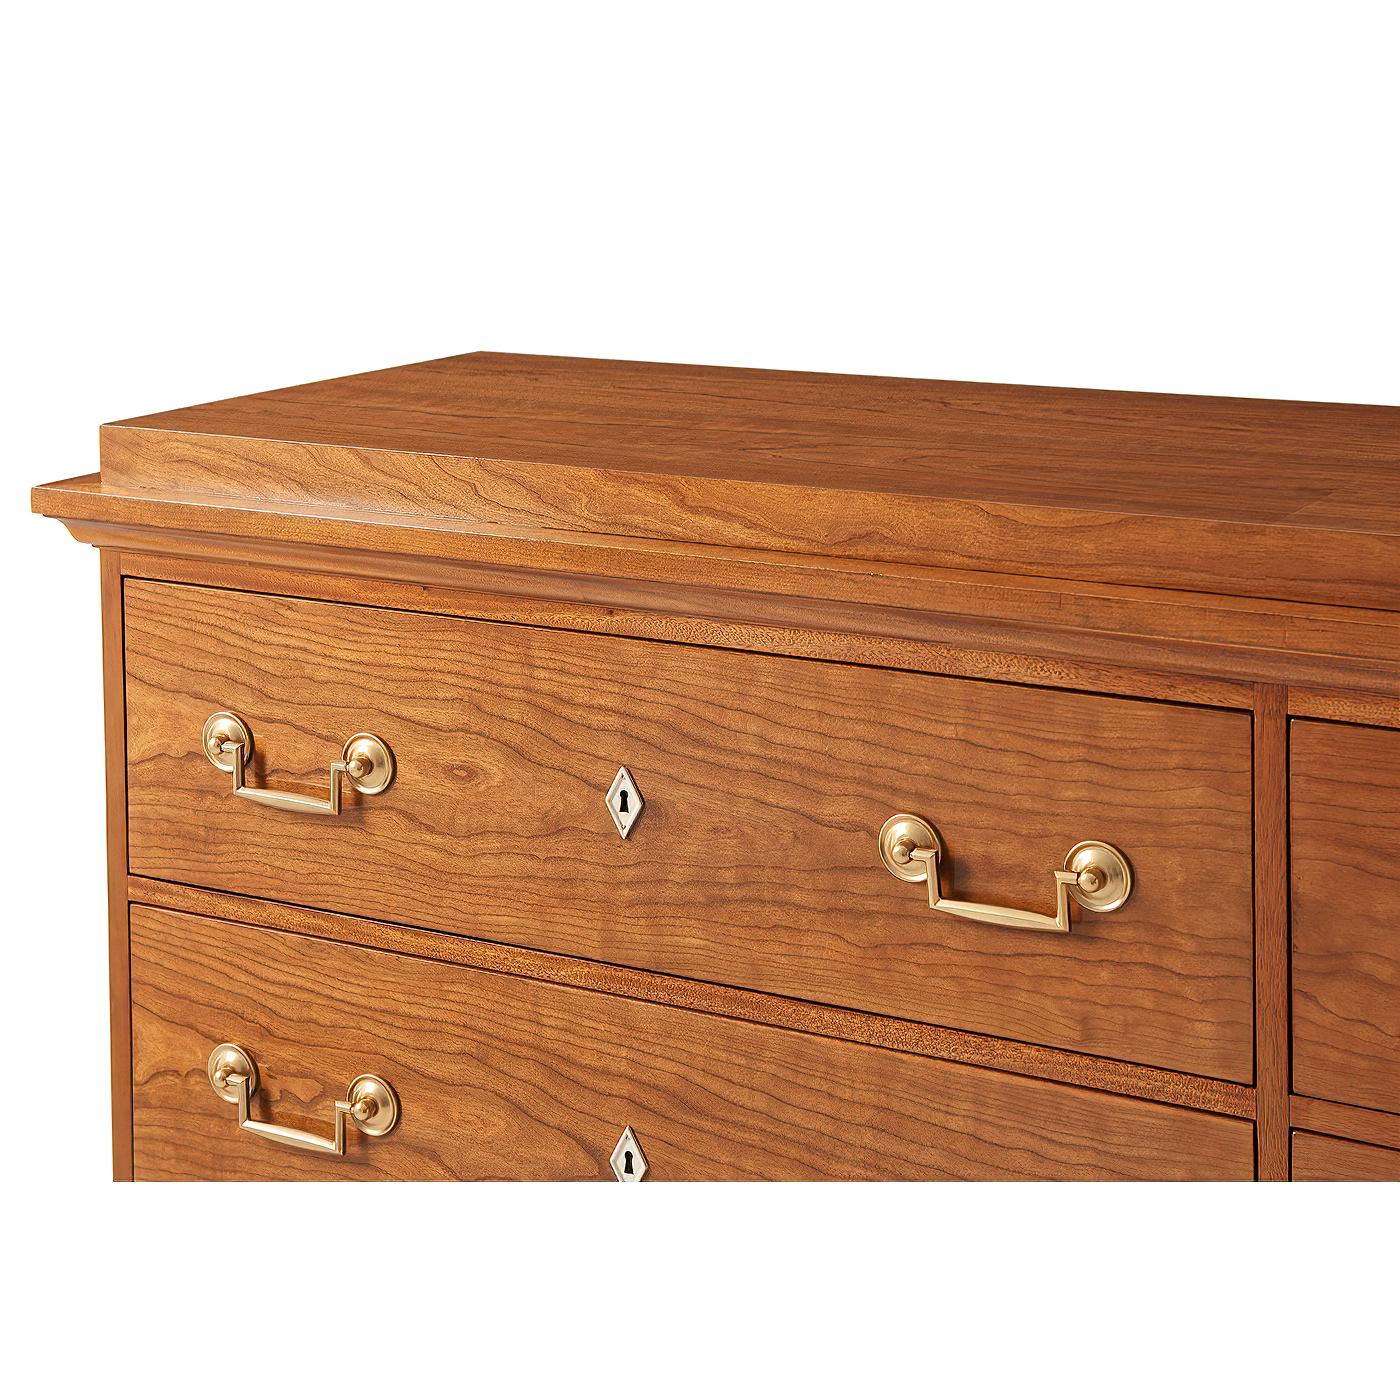 A Biedermeier dresser, architectural detailing shines in the six-drawer long dresser fitted with brass handles and ivory-finish escutcheons. Beautiful stepped-caddy dresser top and bracket feet. Solid cherry and veneers and soft-closing drawer